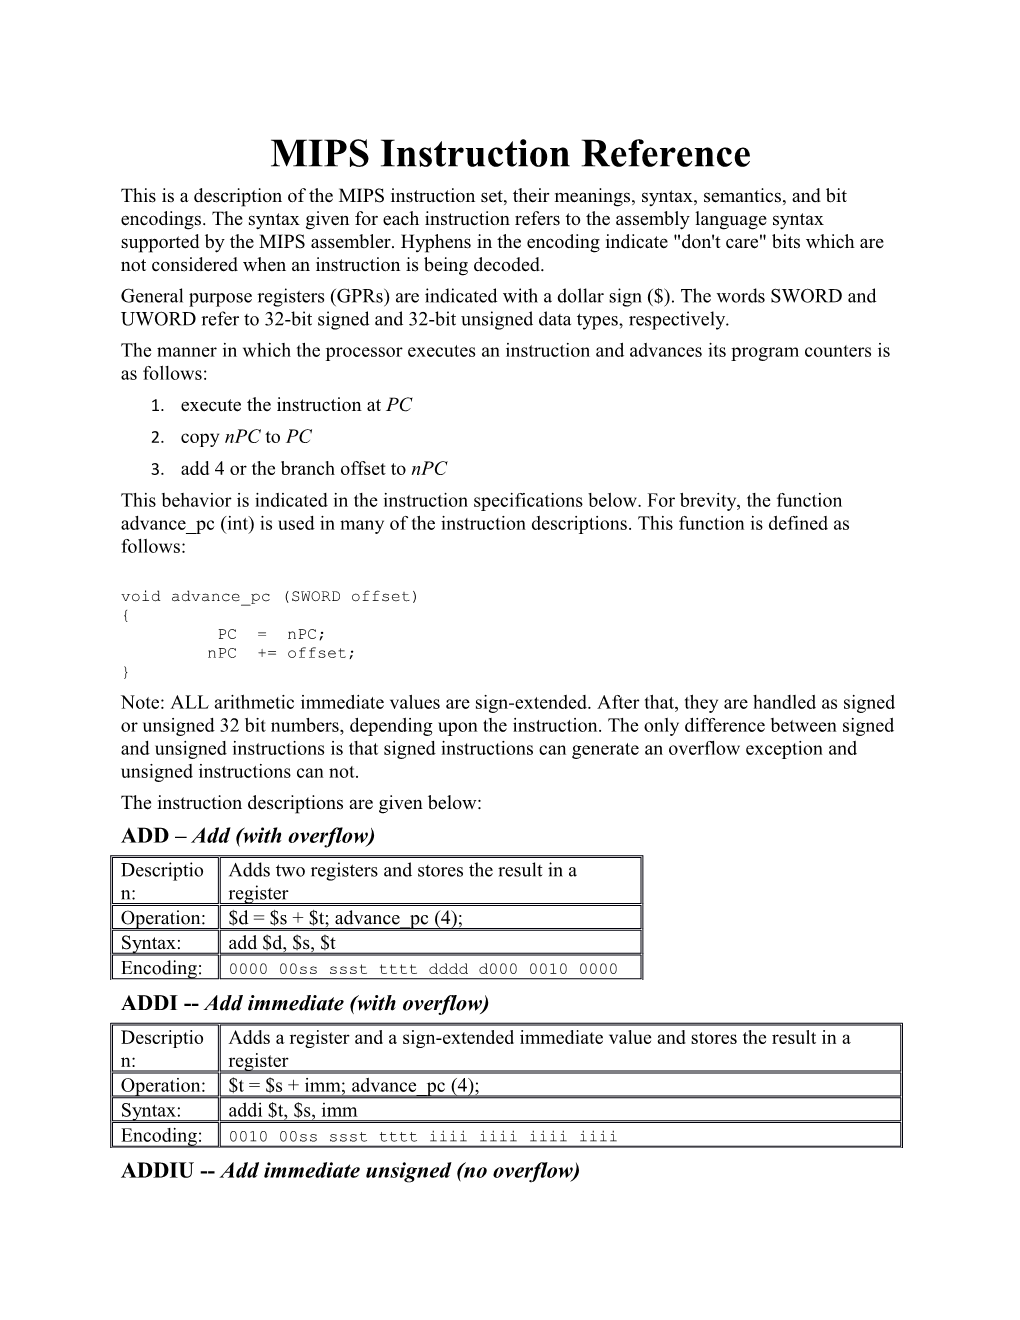 MIPS Instruction Reference